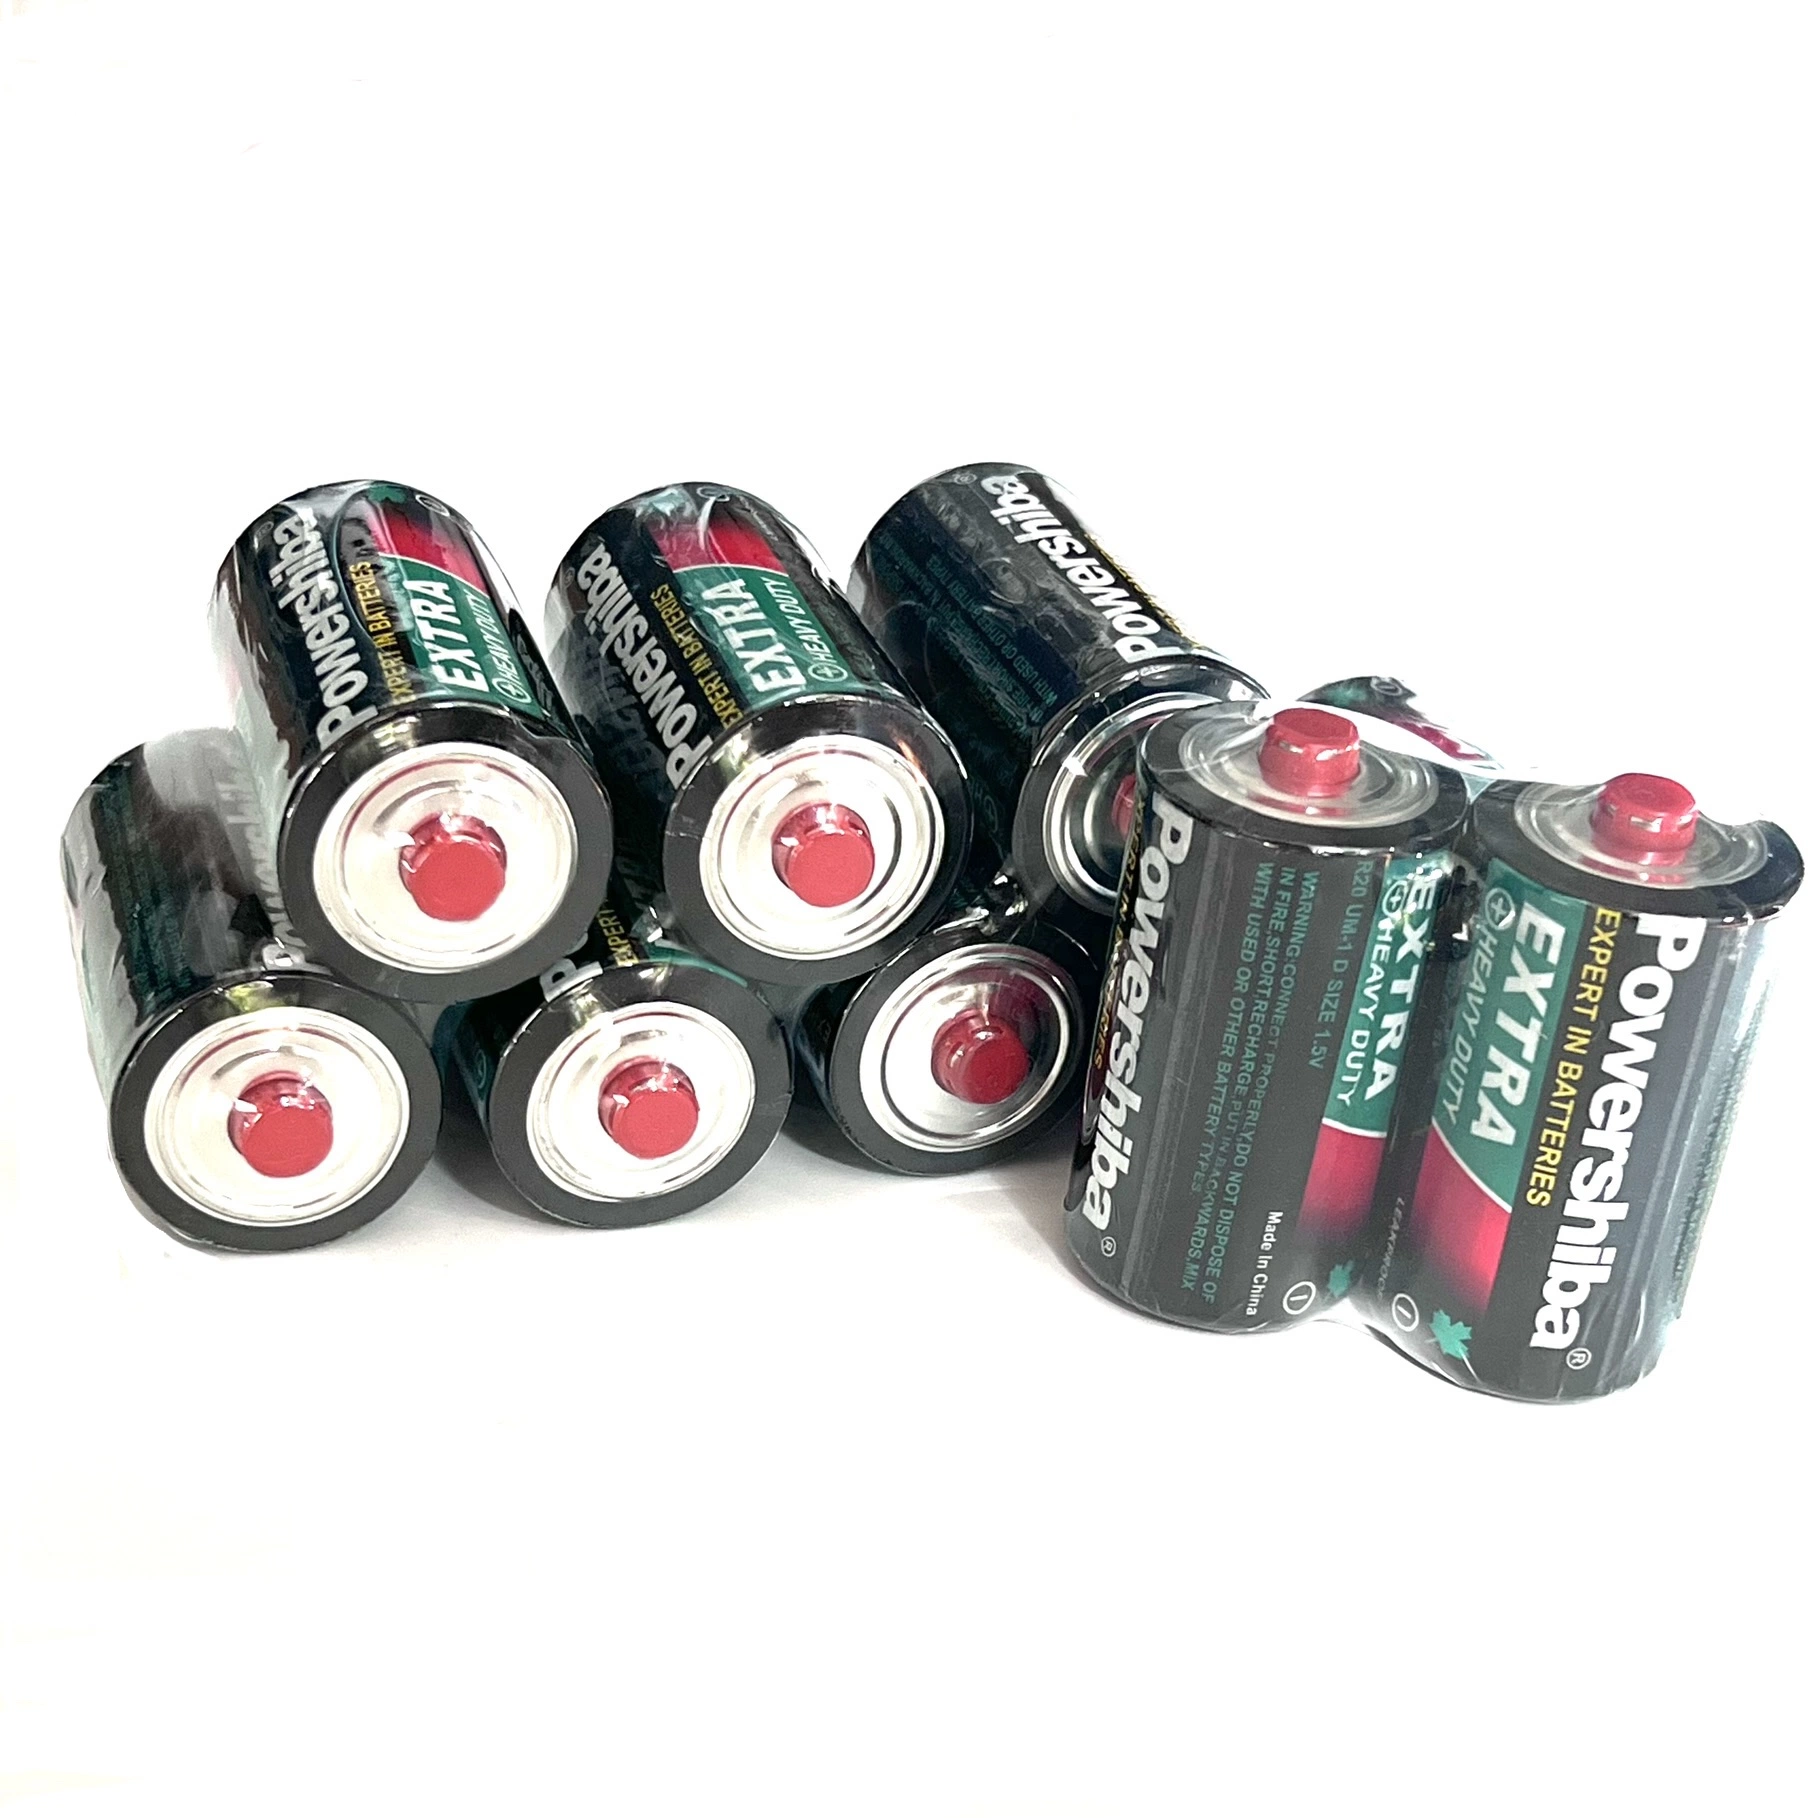 High Capacity Batteries R20 Dry Cell 1.5V C Size Um2 Primary Batteries